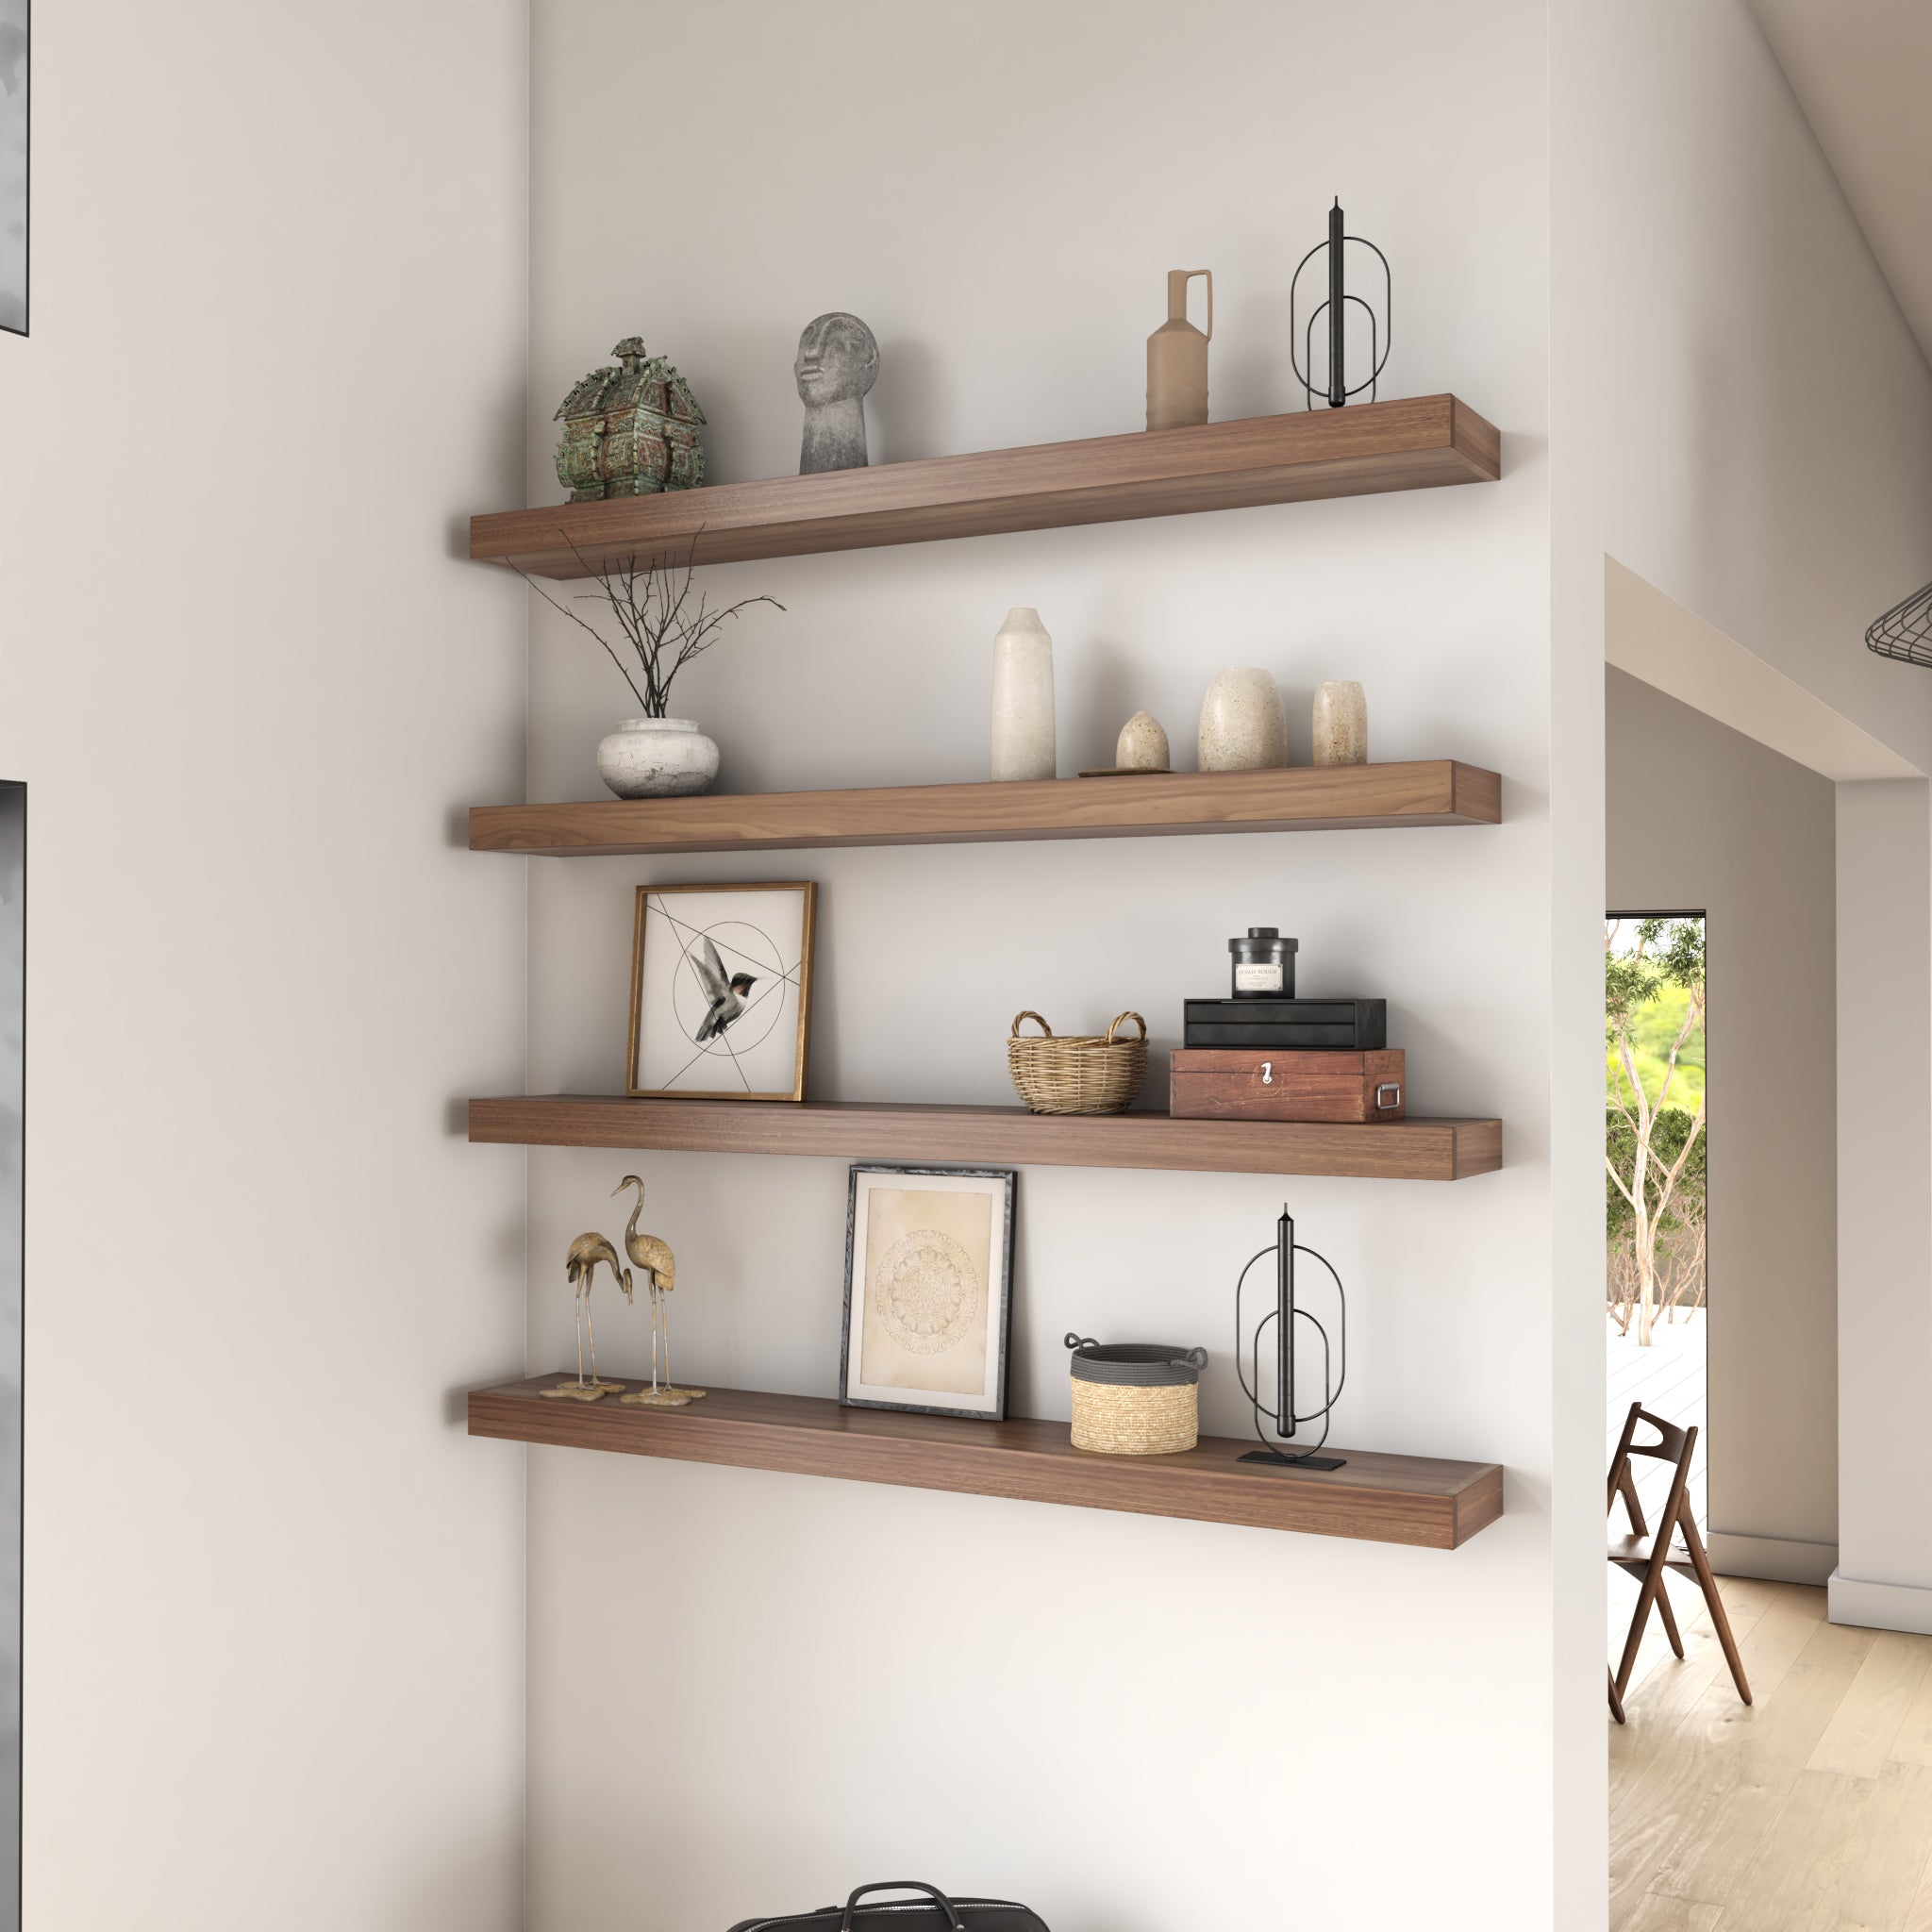 3" Thick Floating Shelves